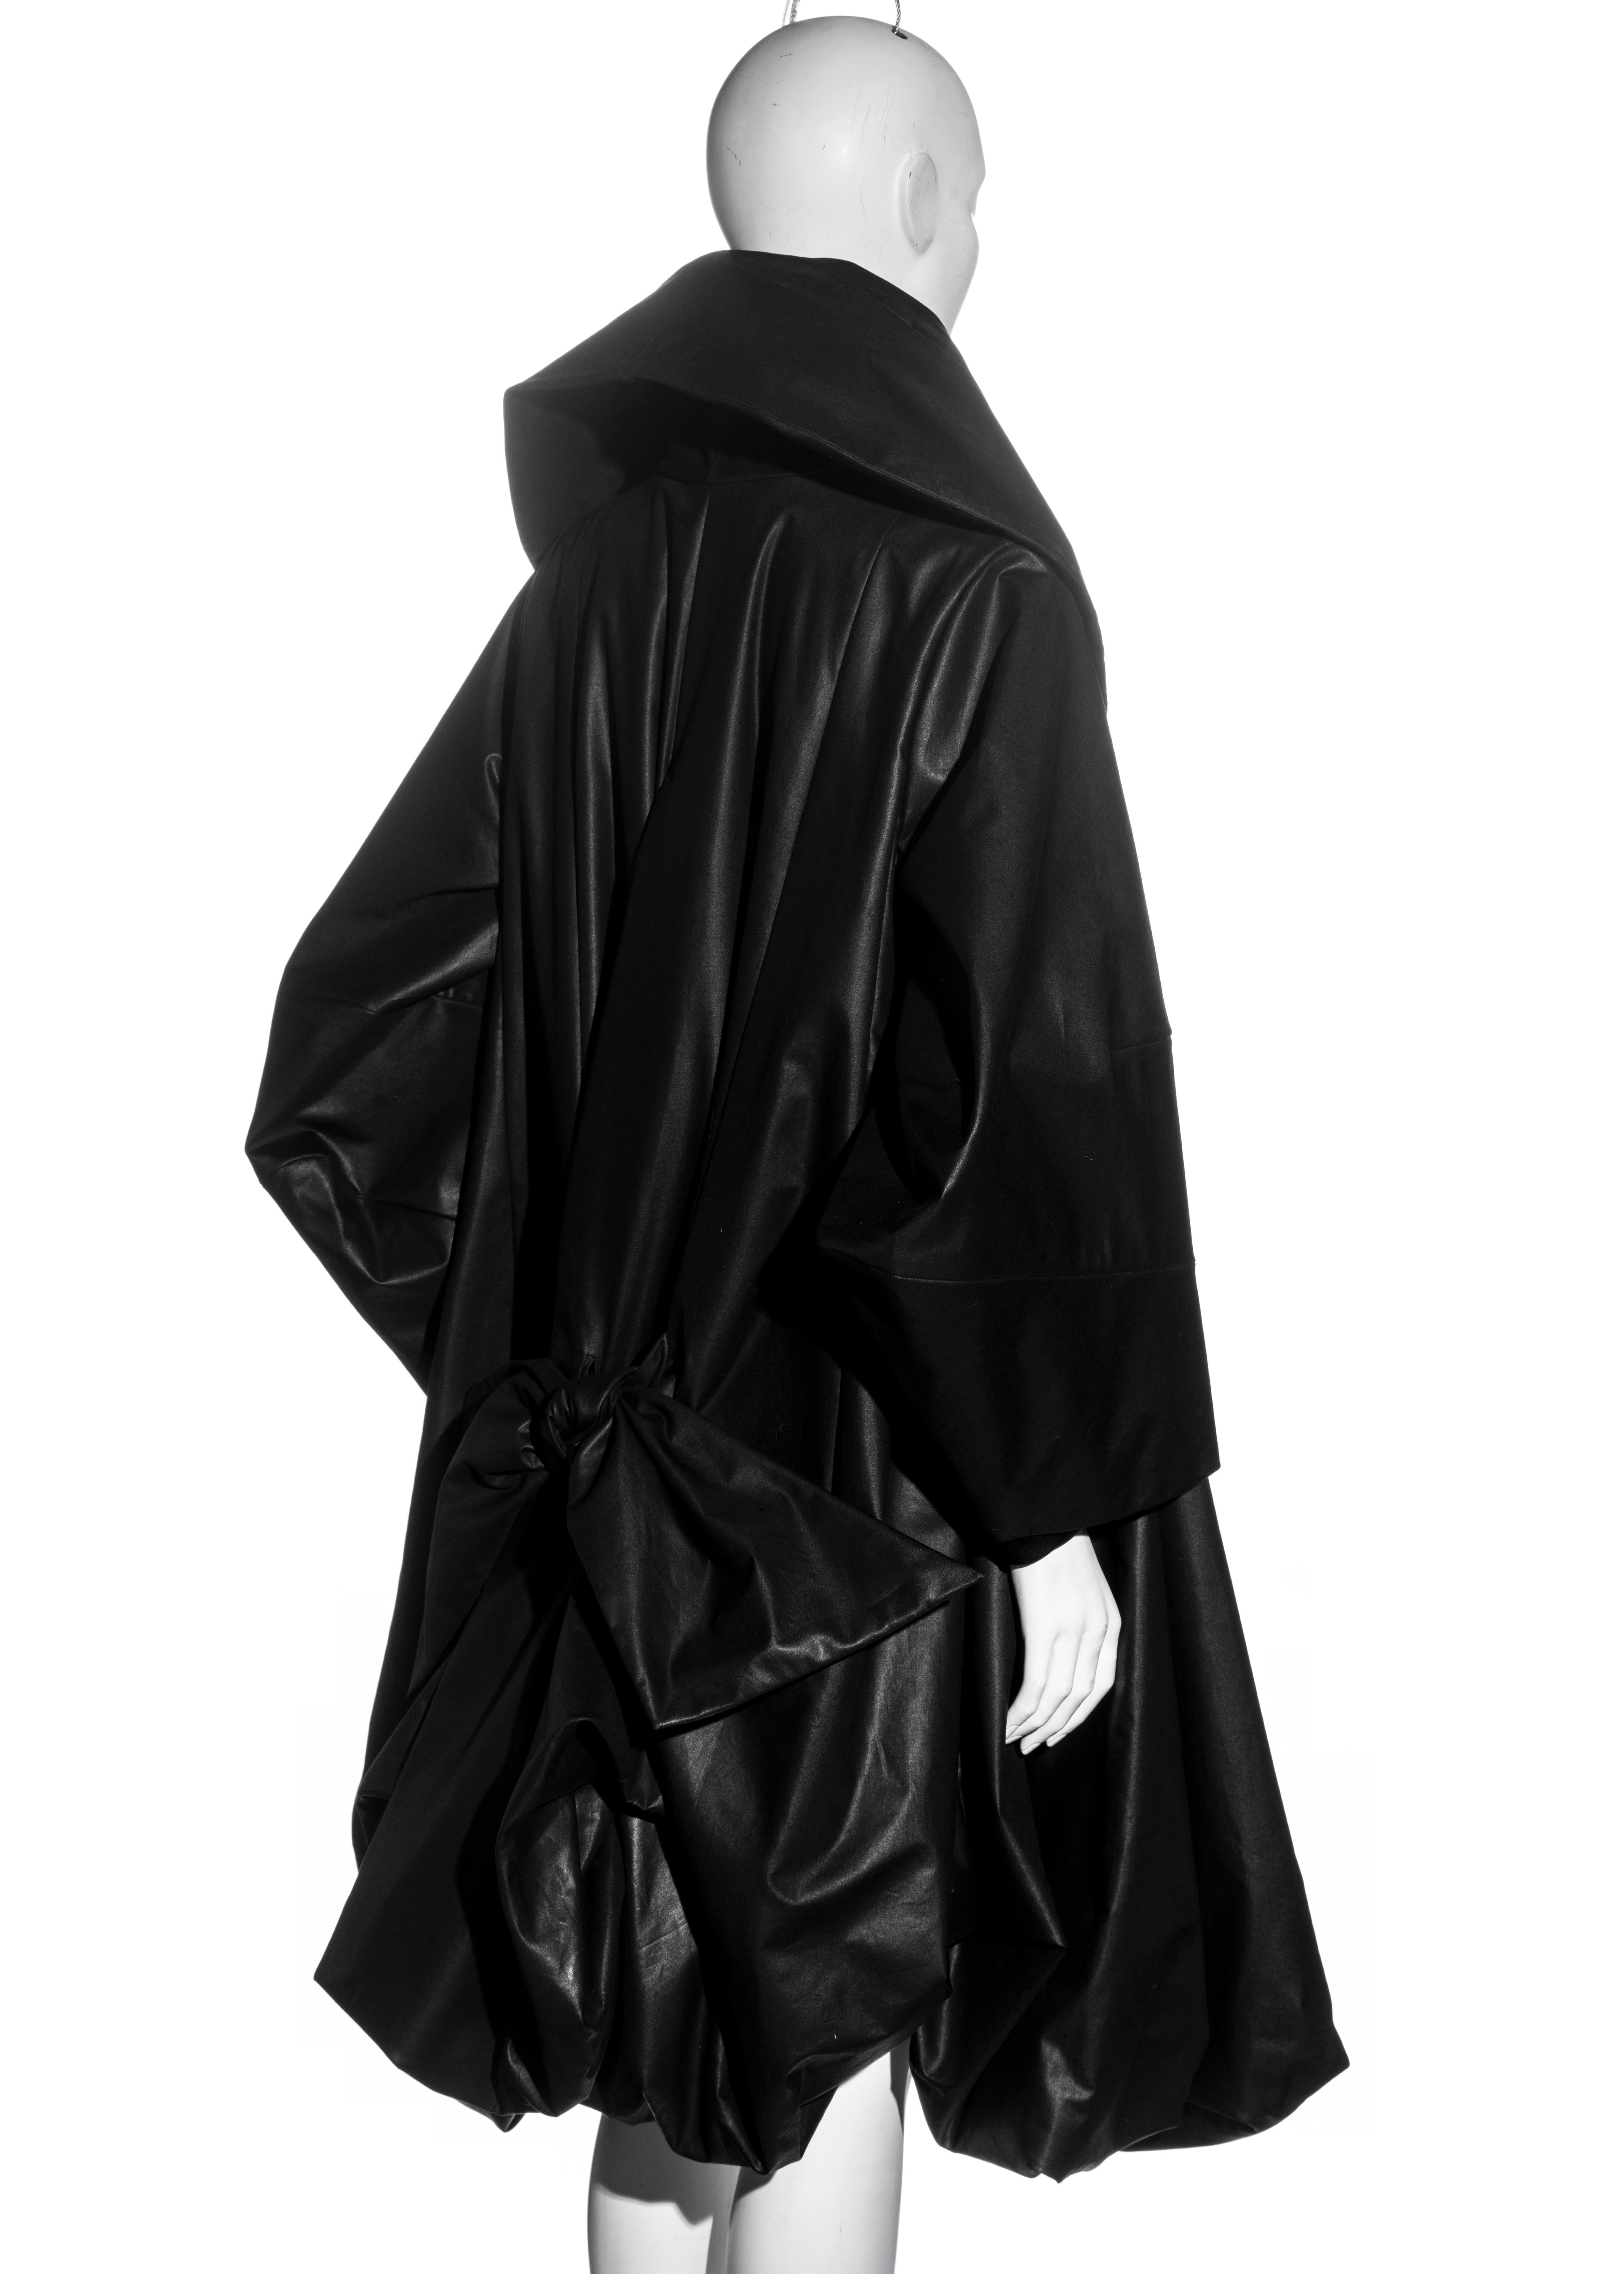 Christian Dior by John Galliano black waxed cotton opera coat, ss 1999 For Sale 3